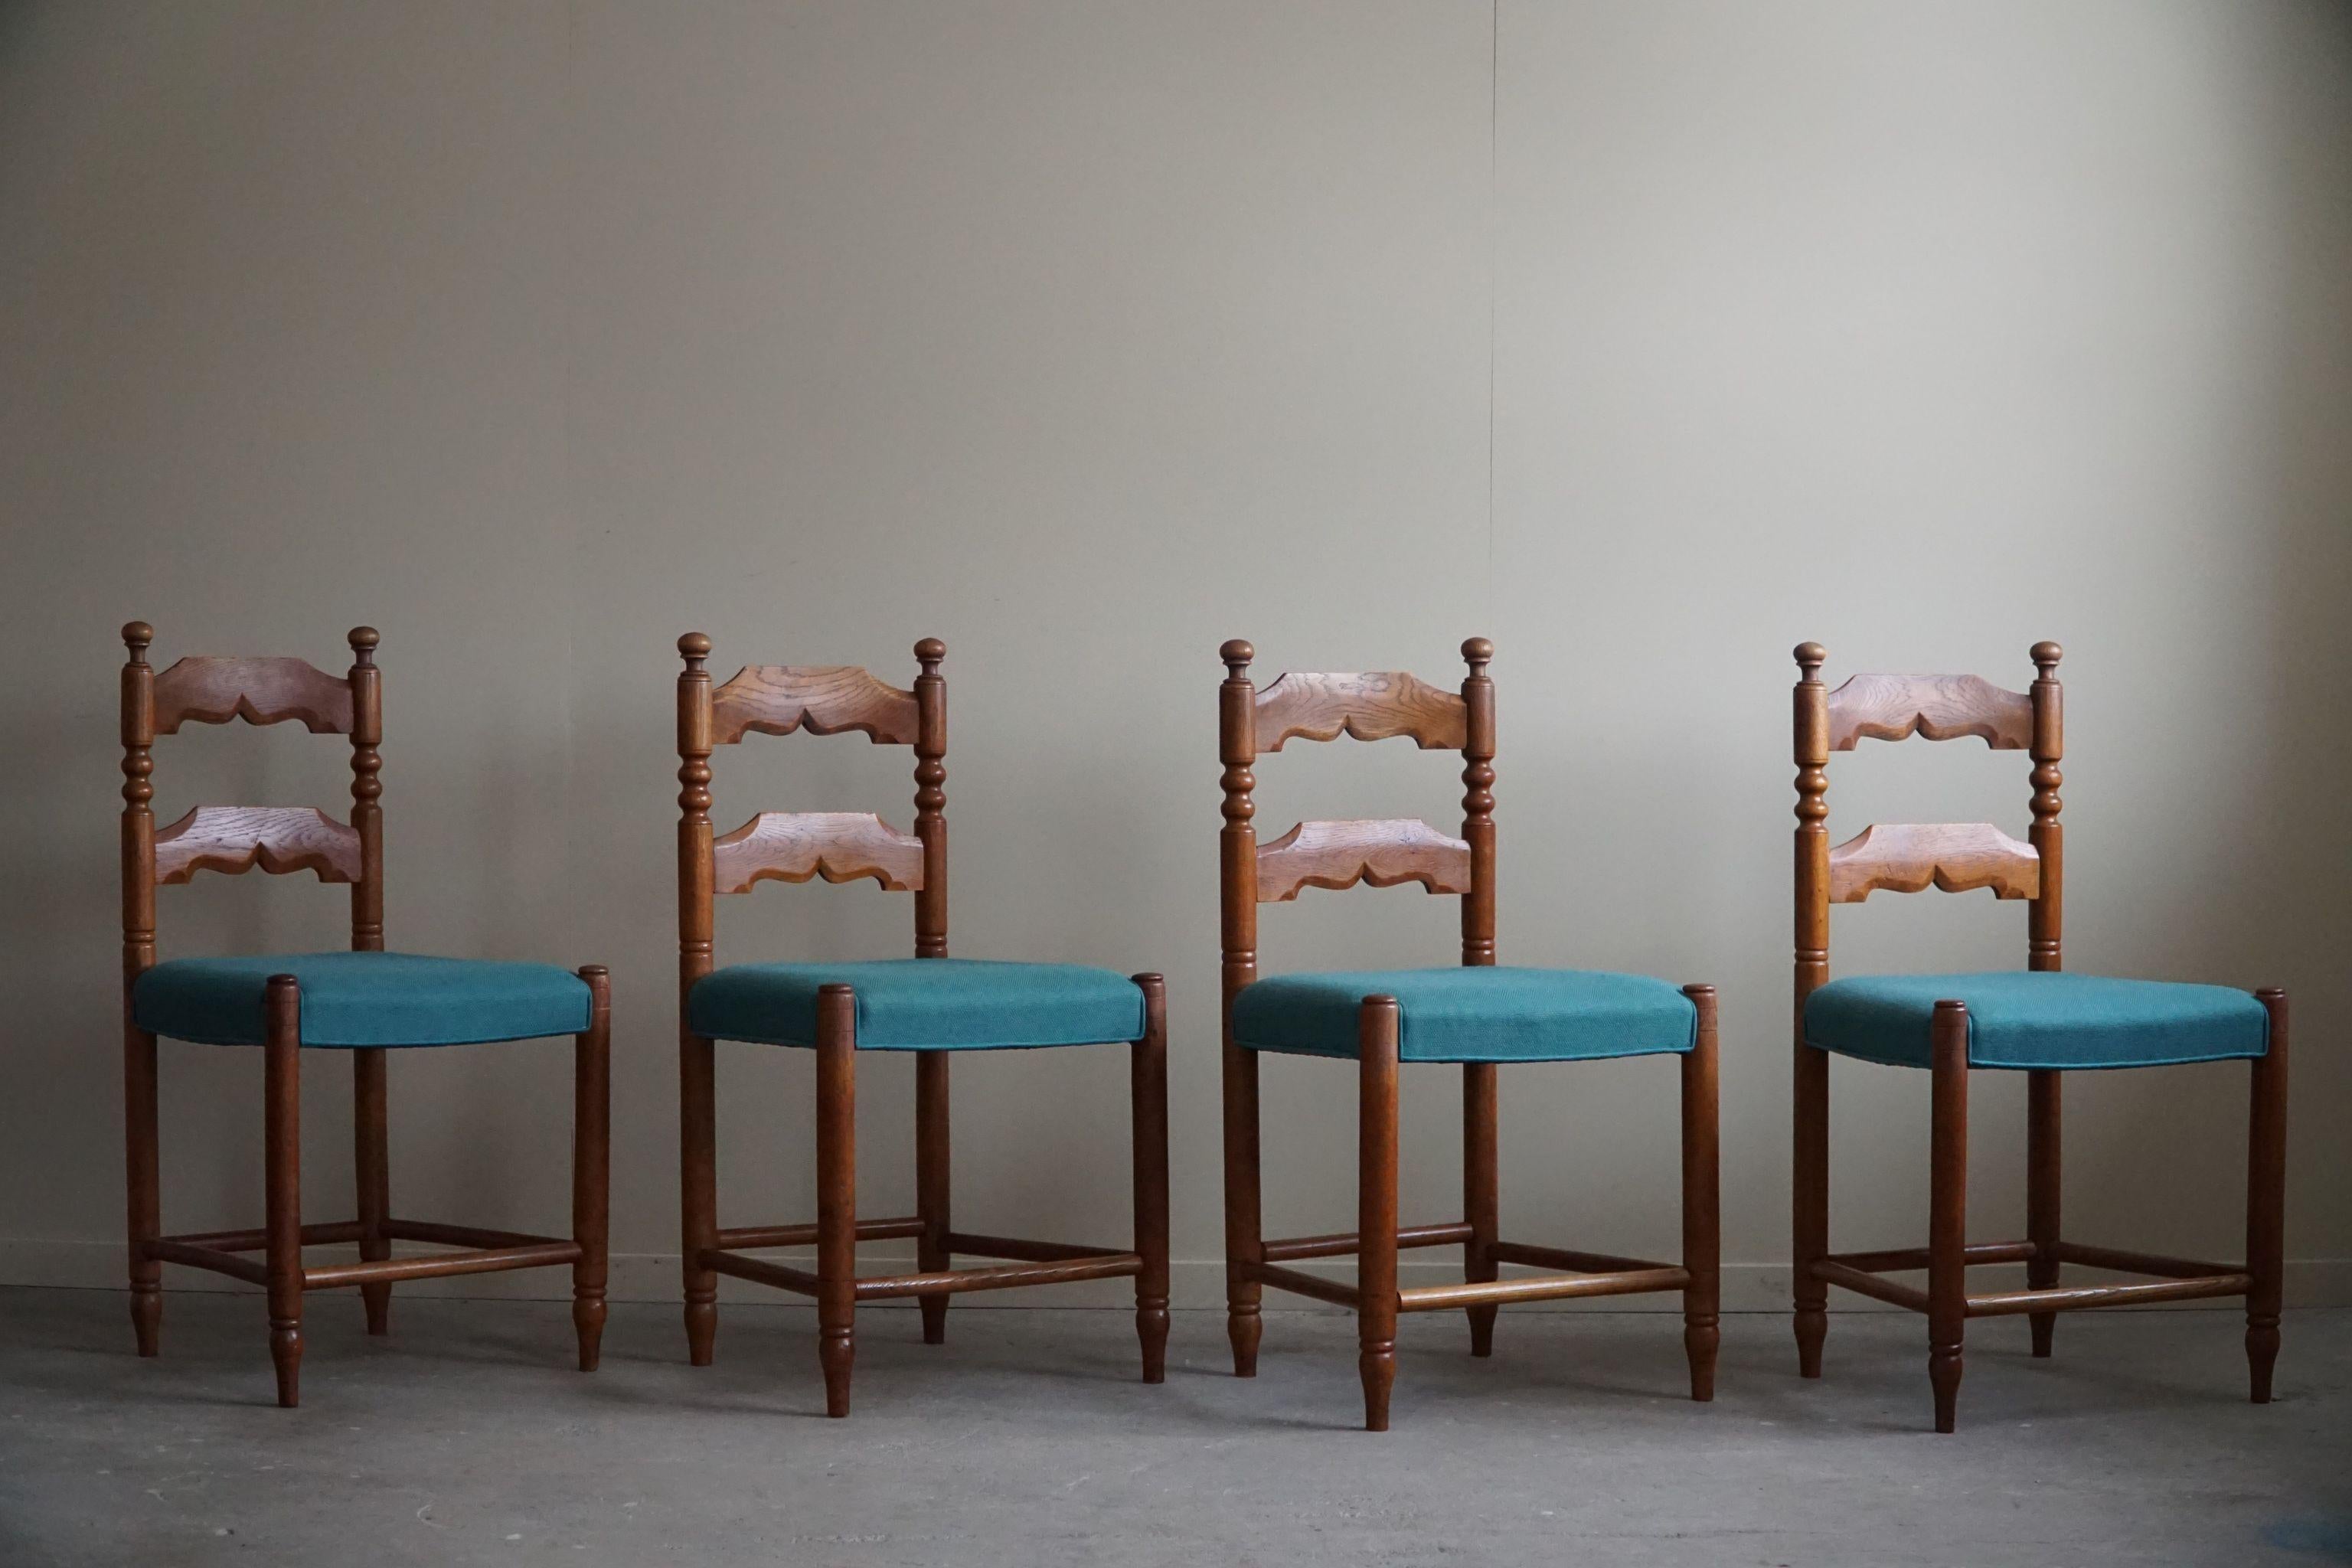 20th Century Set of 8 French Modern Brutalist Chairs, Charles Dudouyt Style, Made in 1950s